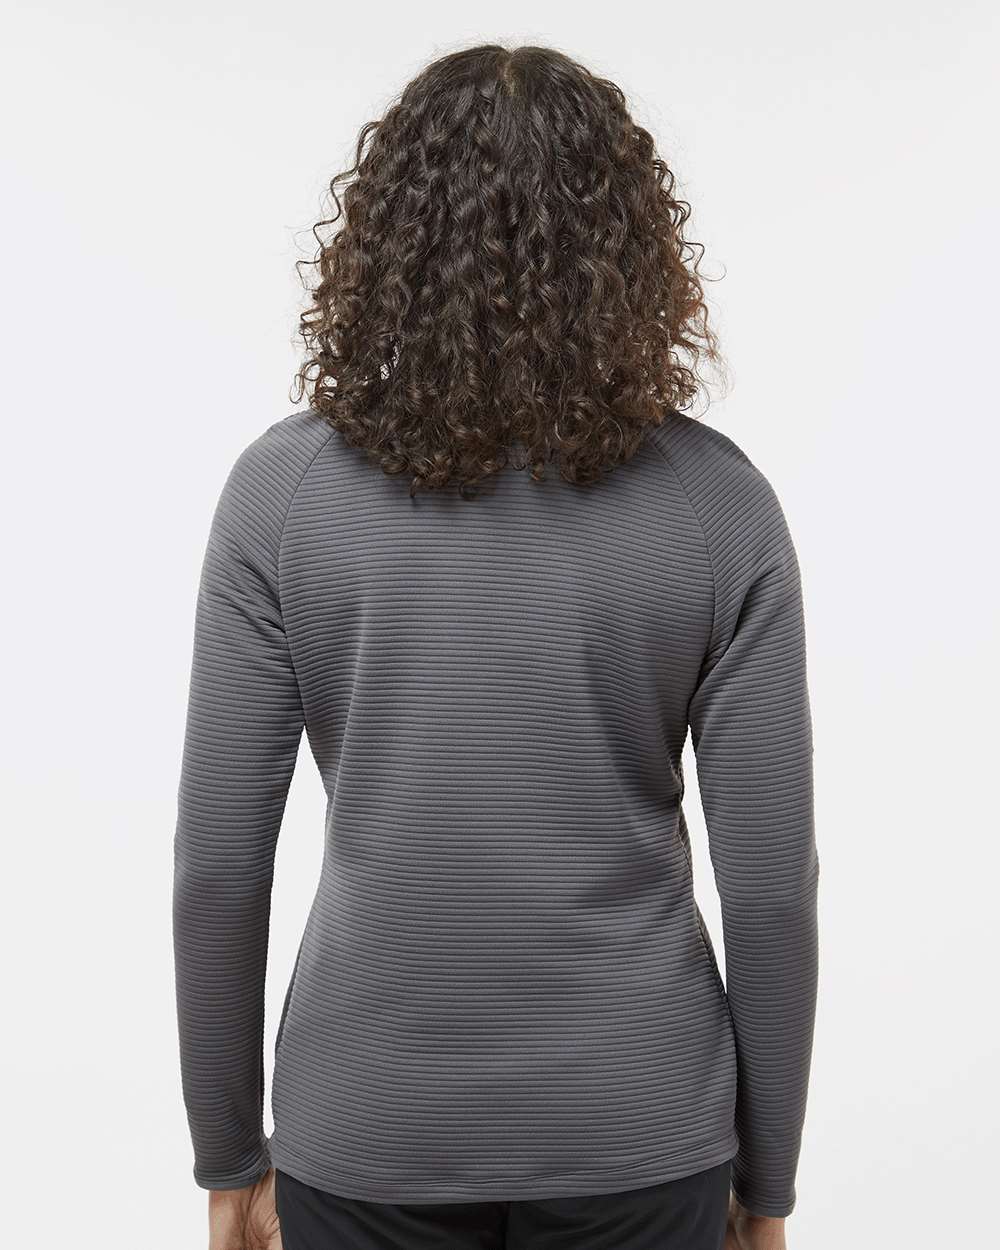 Adidas  A589 Women's Spacer Quarter-Zip Pullover #colormdl_Grey Five